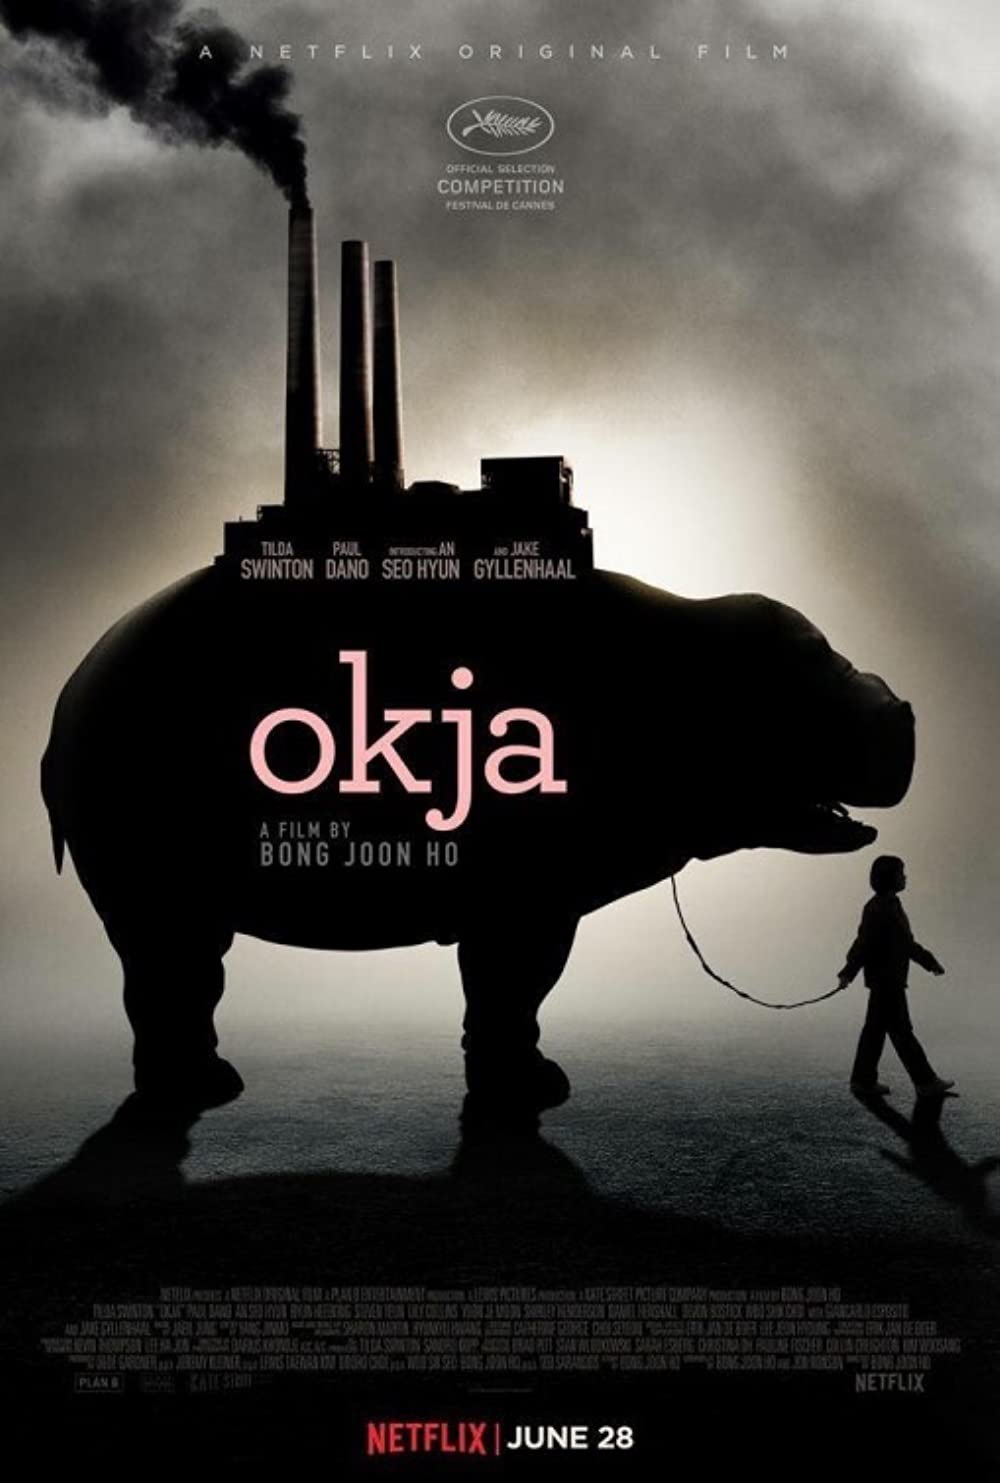 Okja ( 2017) 15 Best Nature Movies to Add in Your Watchlist